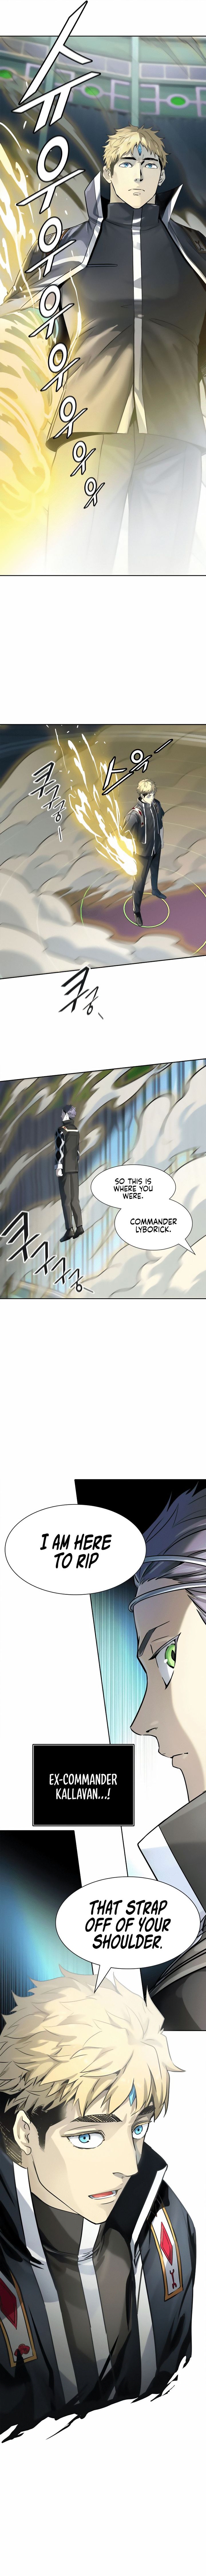 Tower Of God 520 24